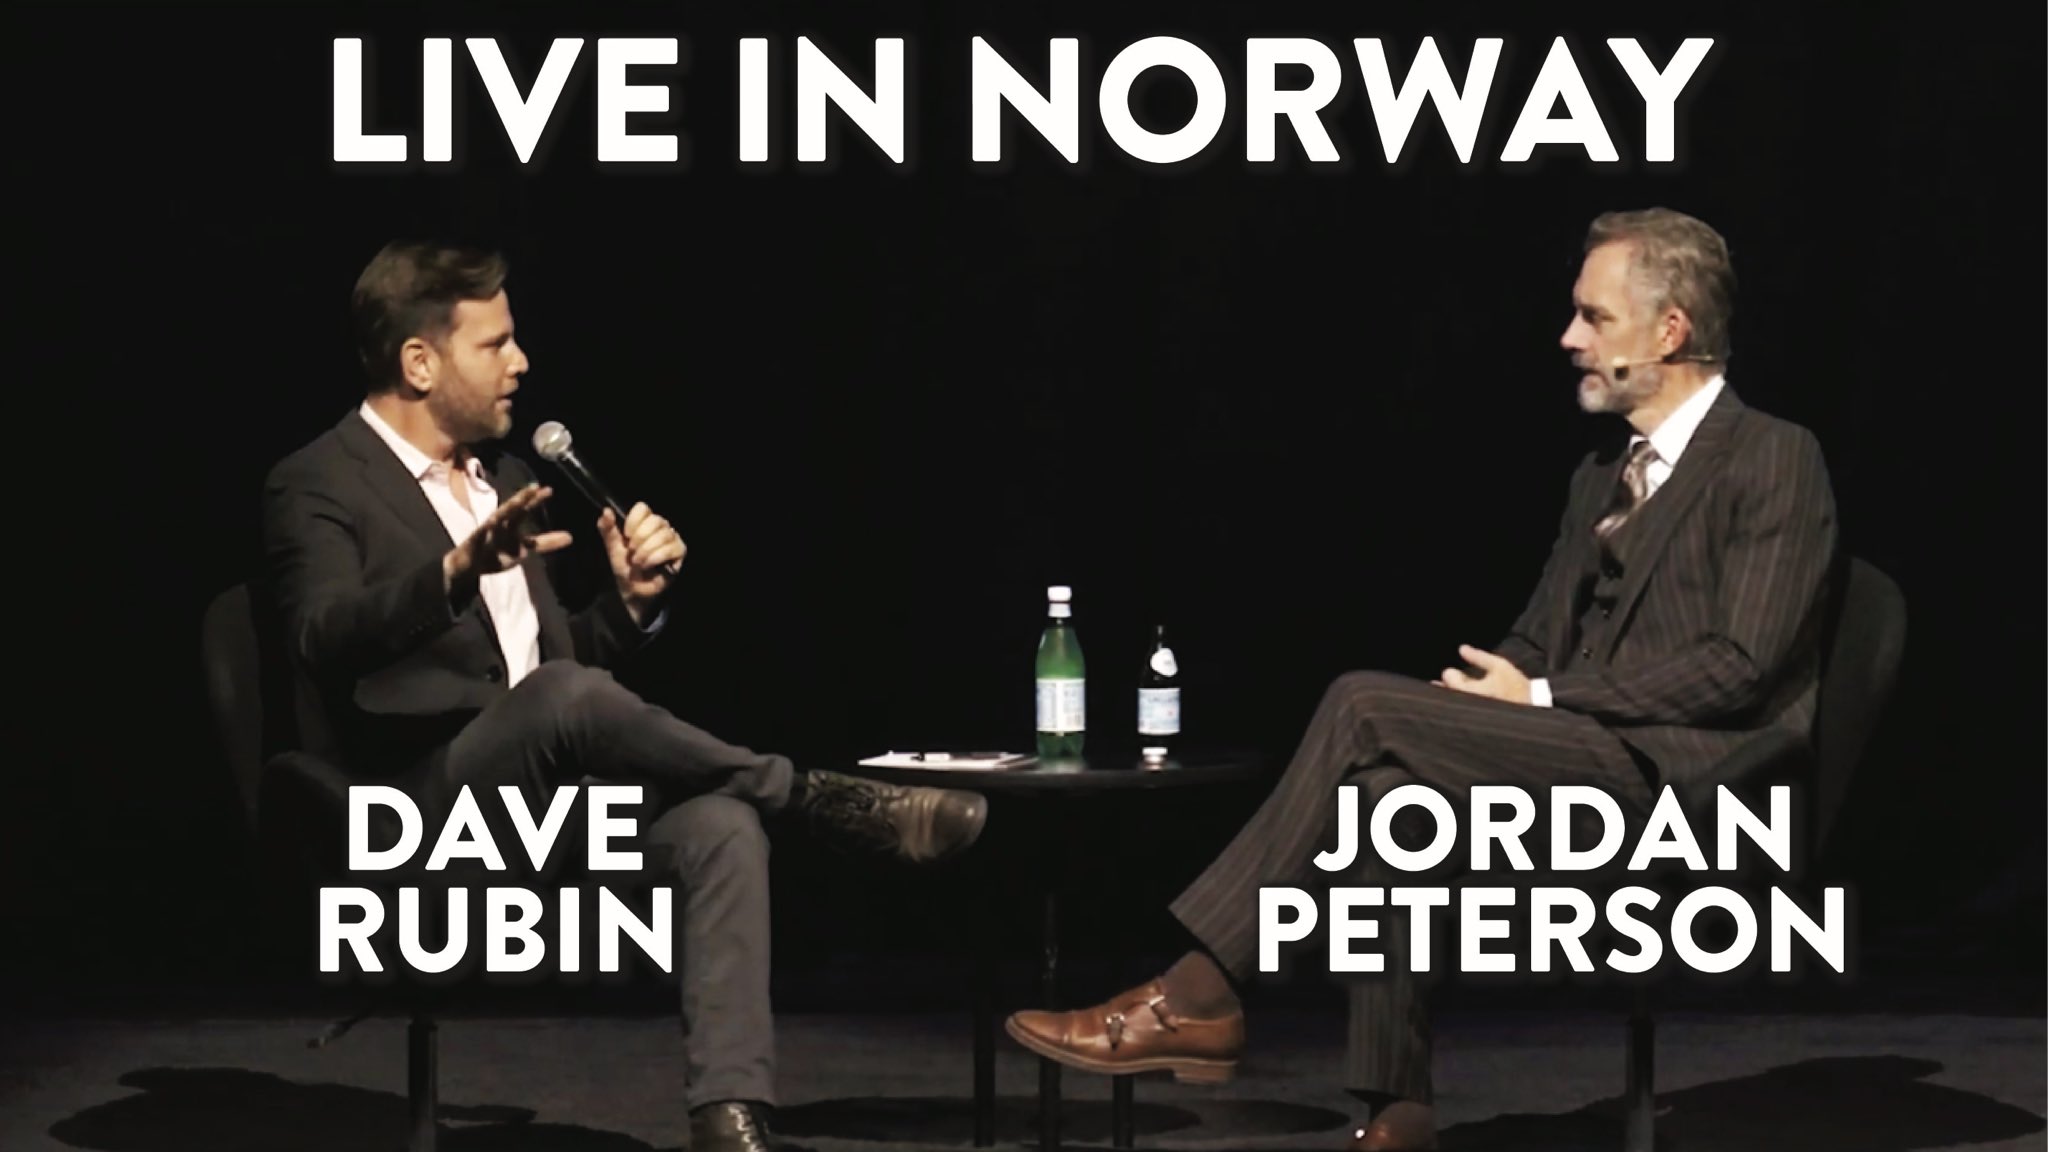 Dave on Twitter: "What an adventure this tour @jordanbpeterson has been. Here's a taste... Jordan Peterson and Dave Rubin Live Q&amp;A in Oslo, Norway. YouTube: https://t.co/nEgRHIW5JL Ad-free podcast: https://t.co/SEnI83NawM Regular